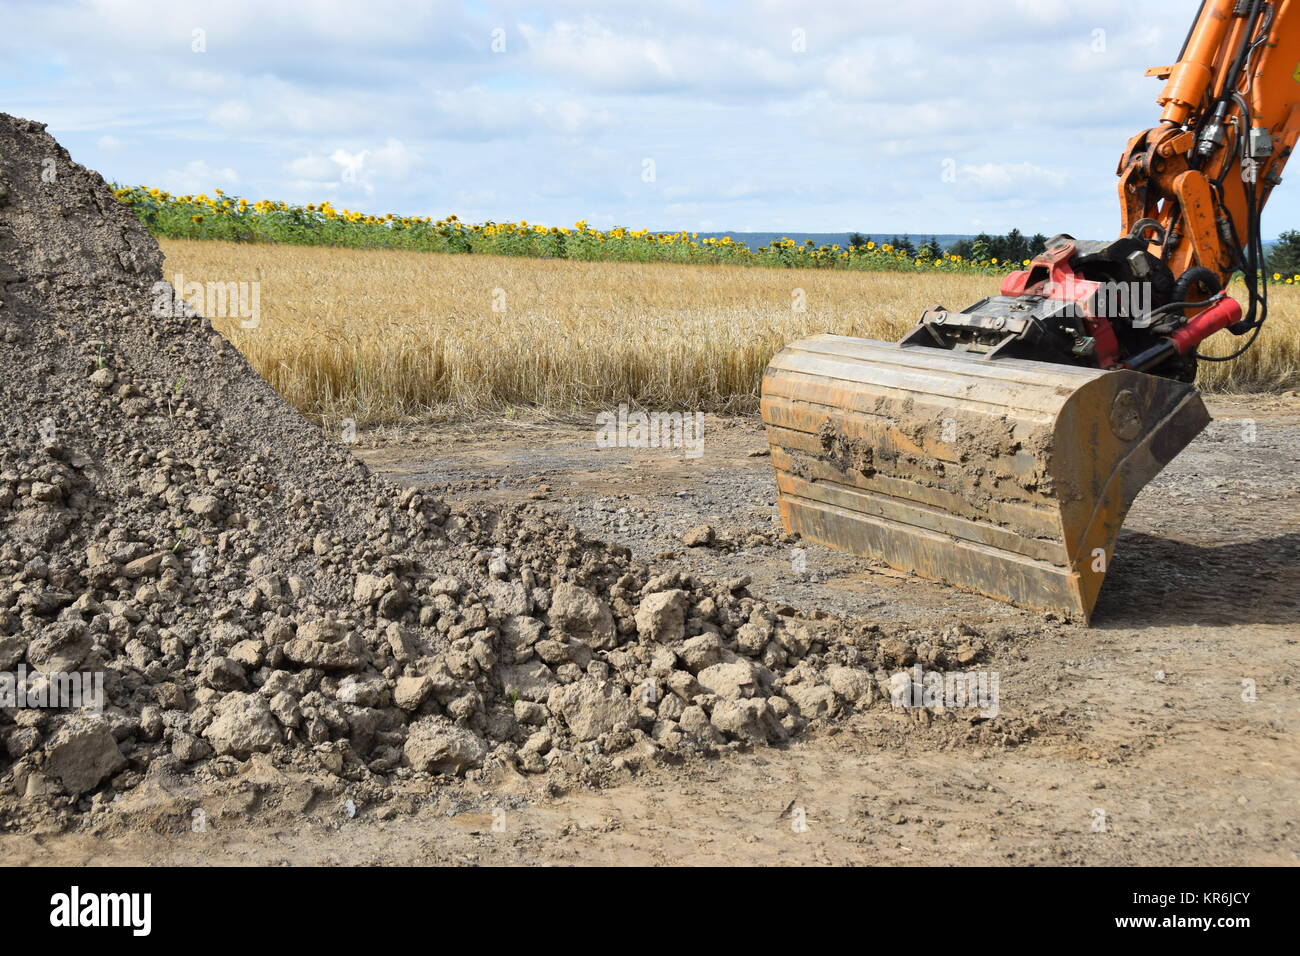 wheel excavator with bucket grave in front of a wheat field Stock Photo